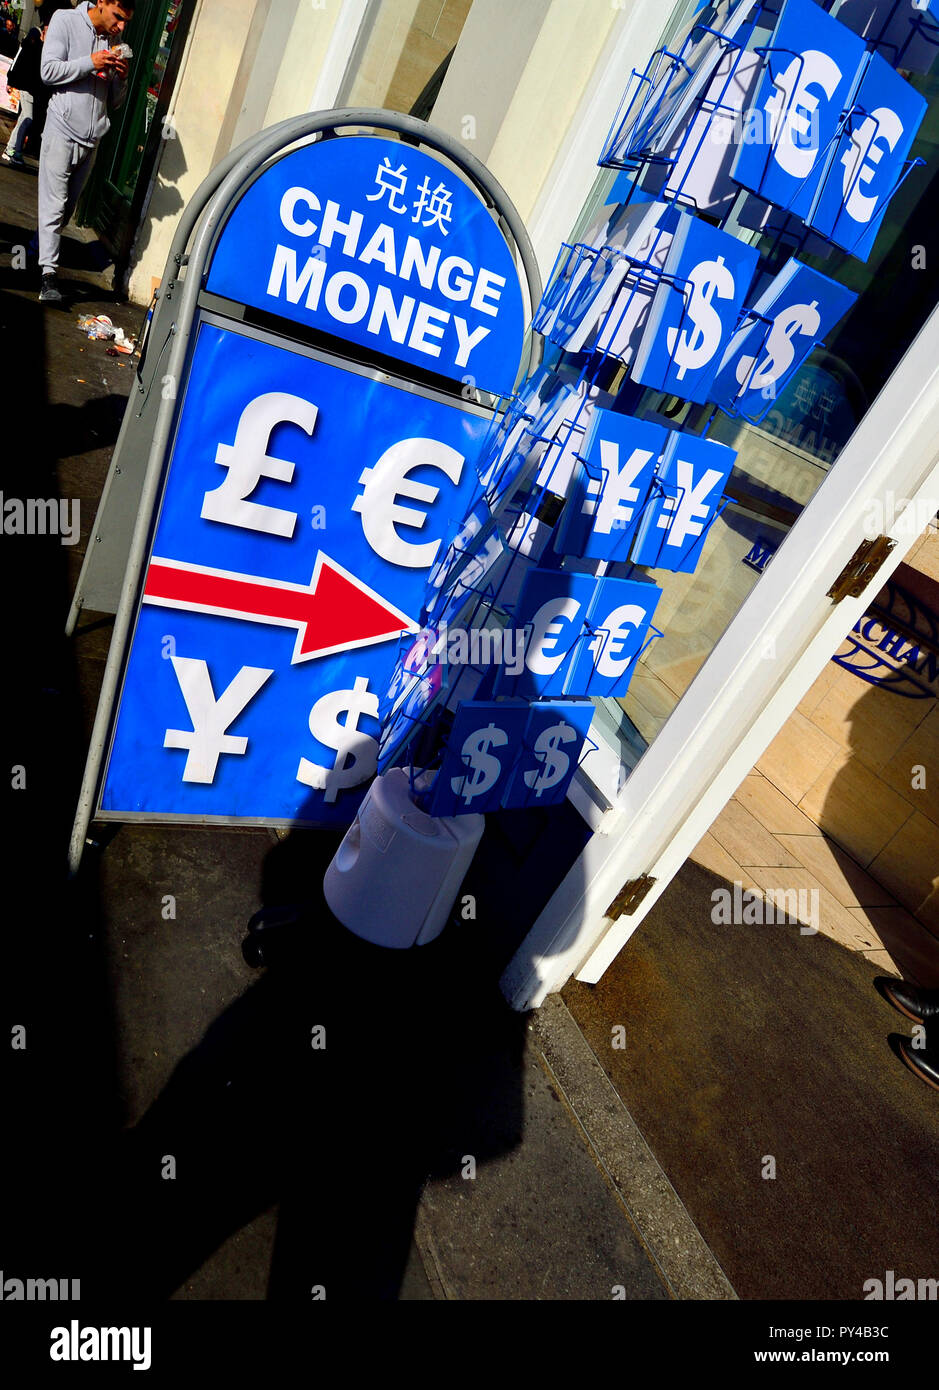 Money changing kiosk on Whitehall, London, England, UK. Currency postcards on sale Stock Photo